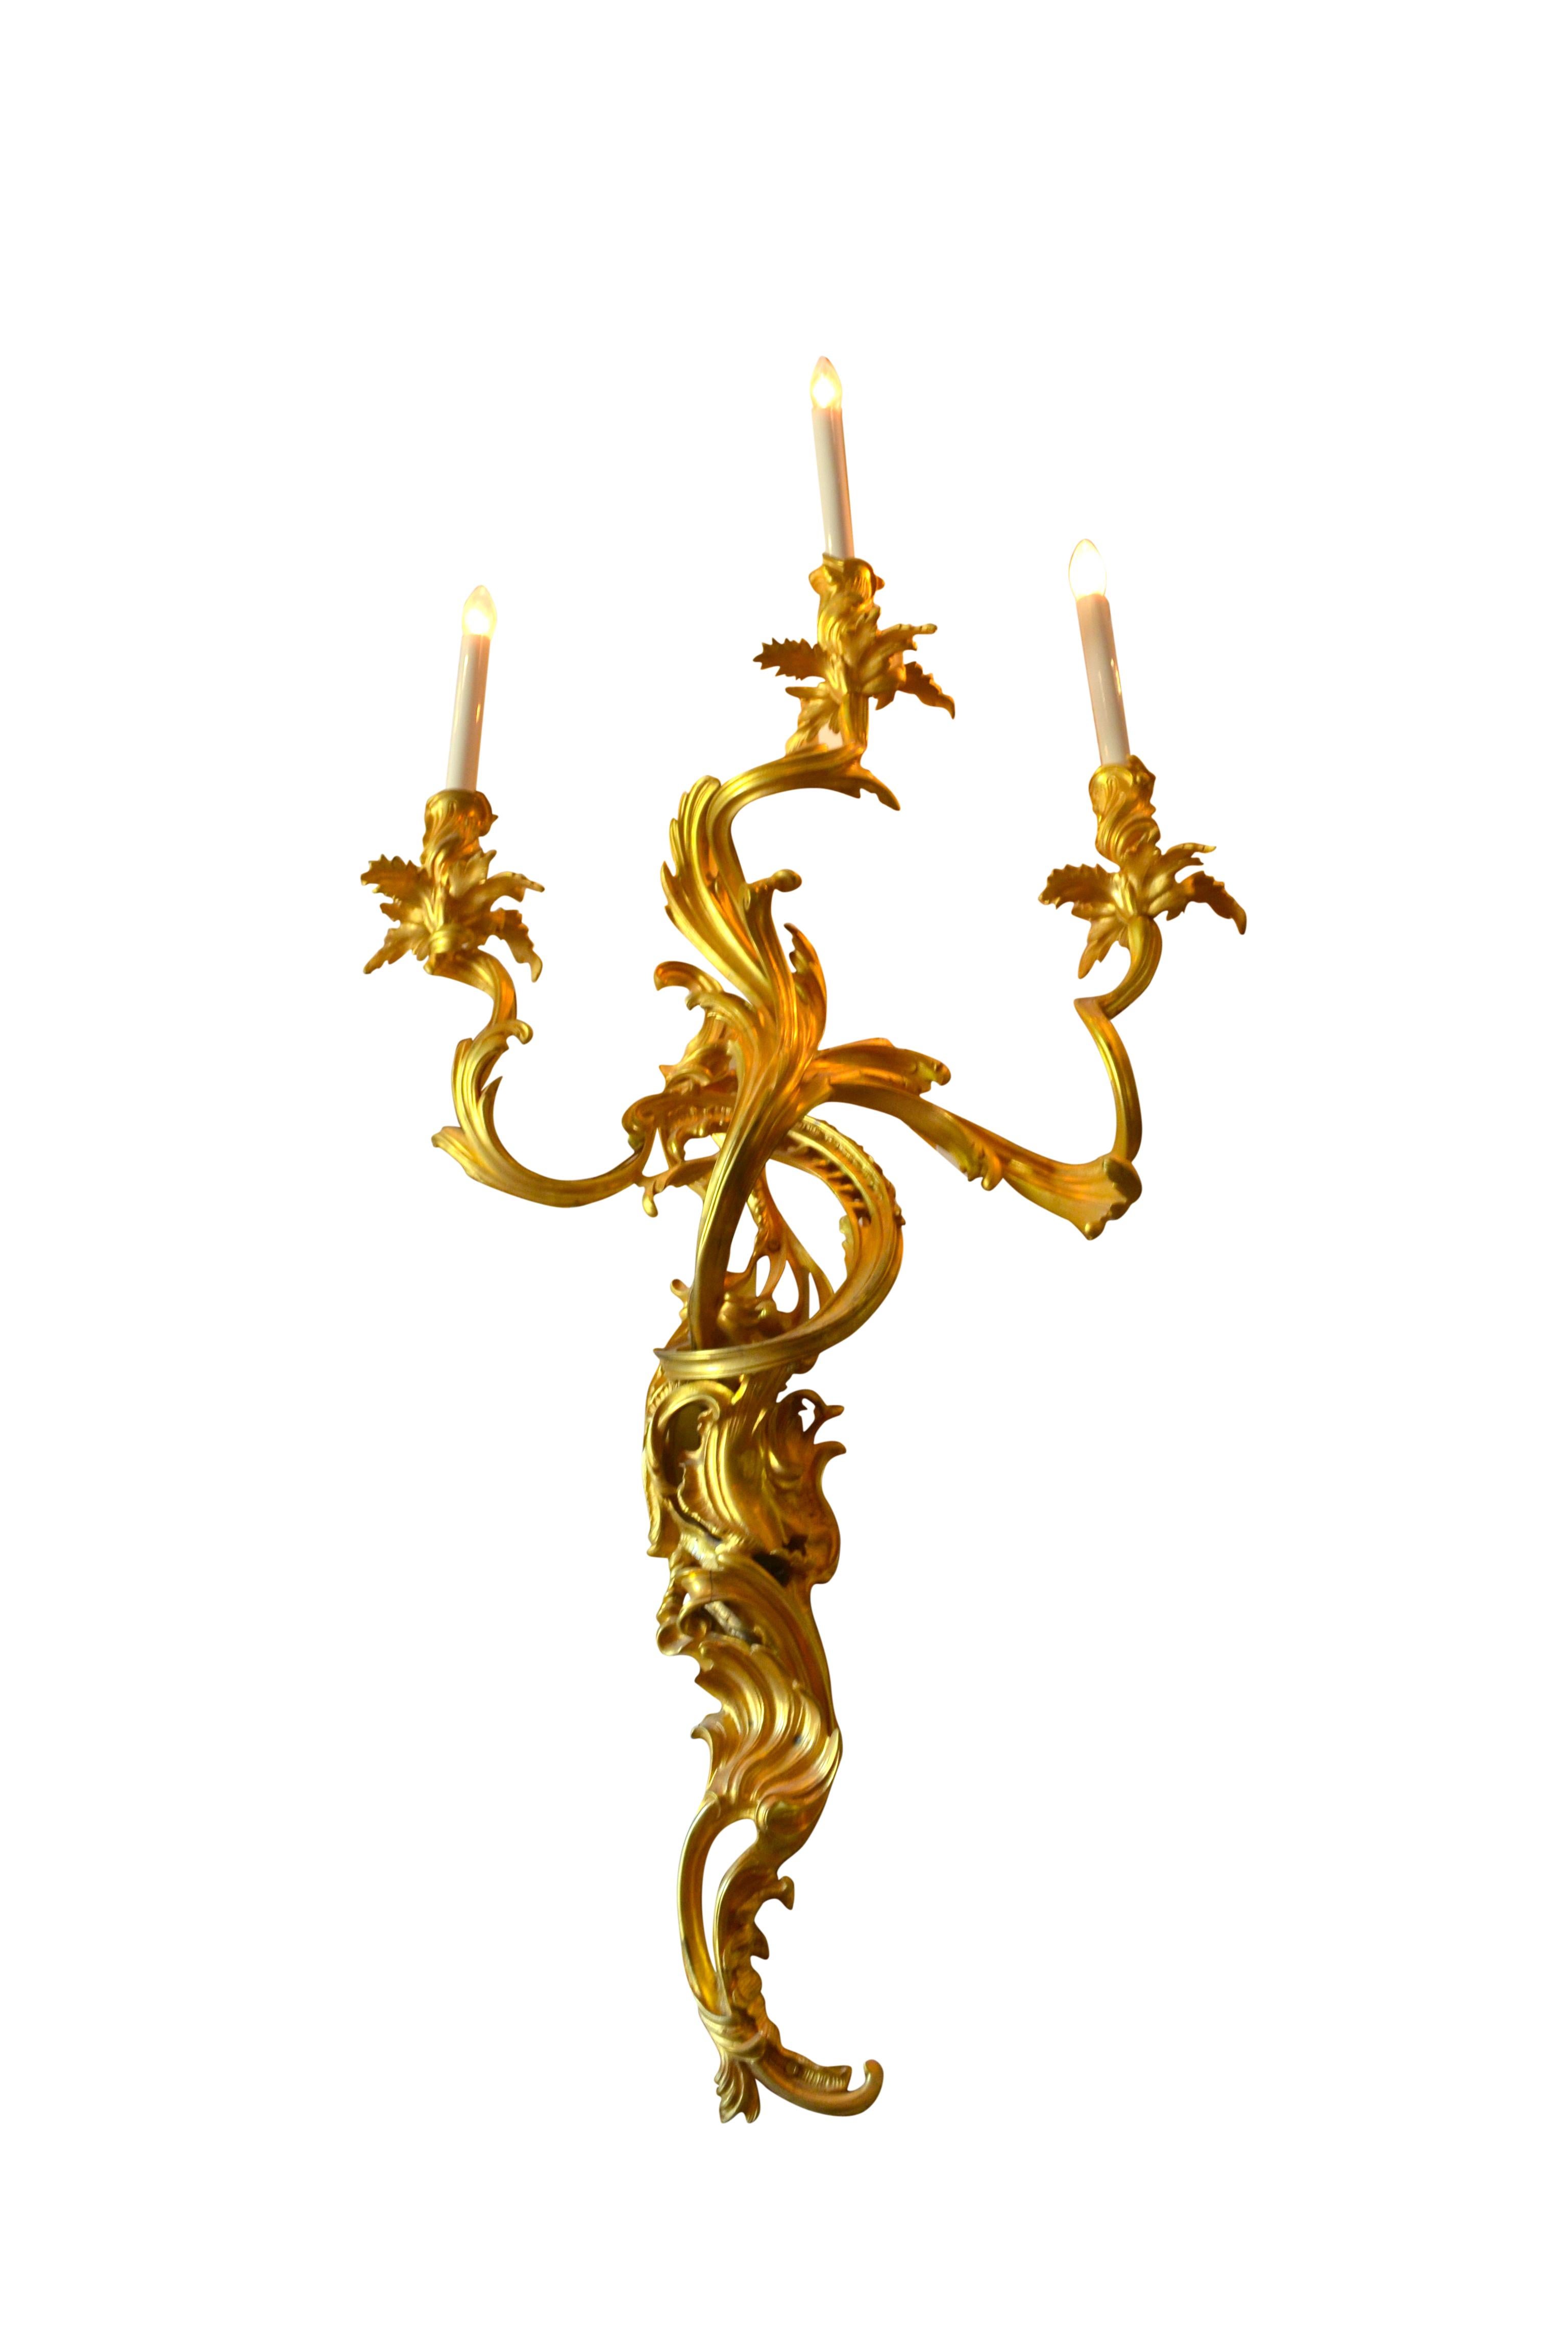 Pair of large Louis XV style gilt bronze wall sconces; French late 19th century, each with voluted backplate cast with foliate scrolls and palmettes, and with voluted intertwined foliate candle arms fitted with foliate drip pans and nozzles.
 